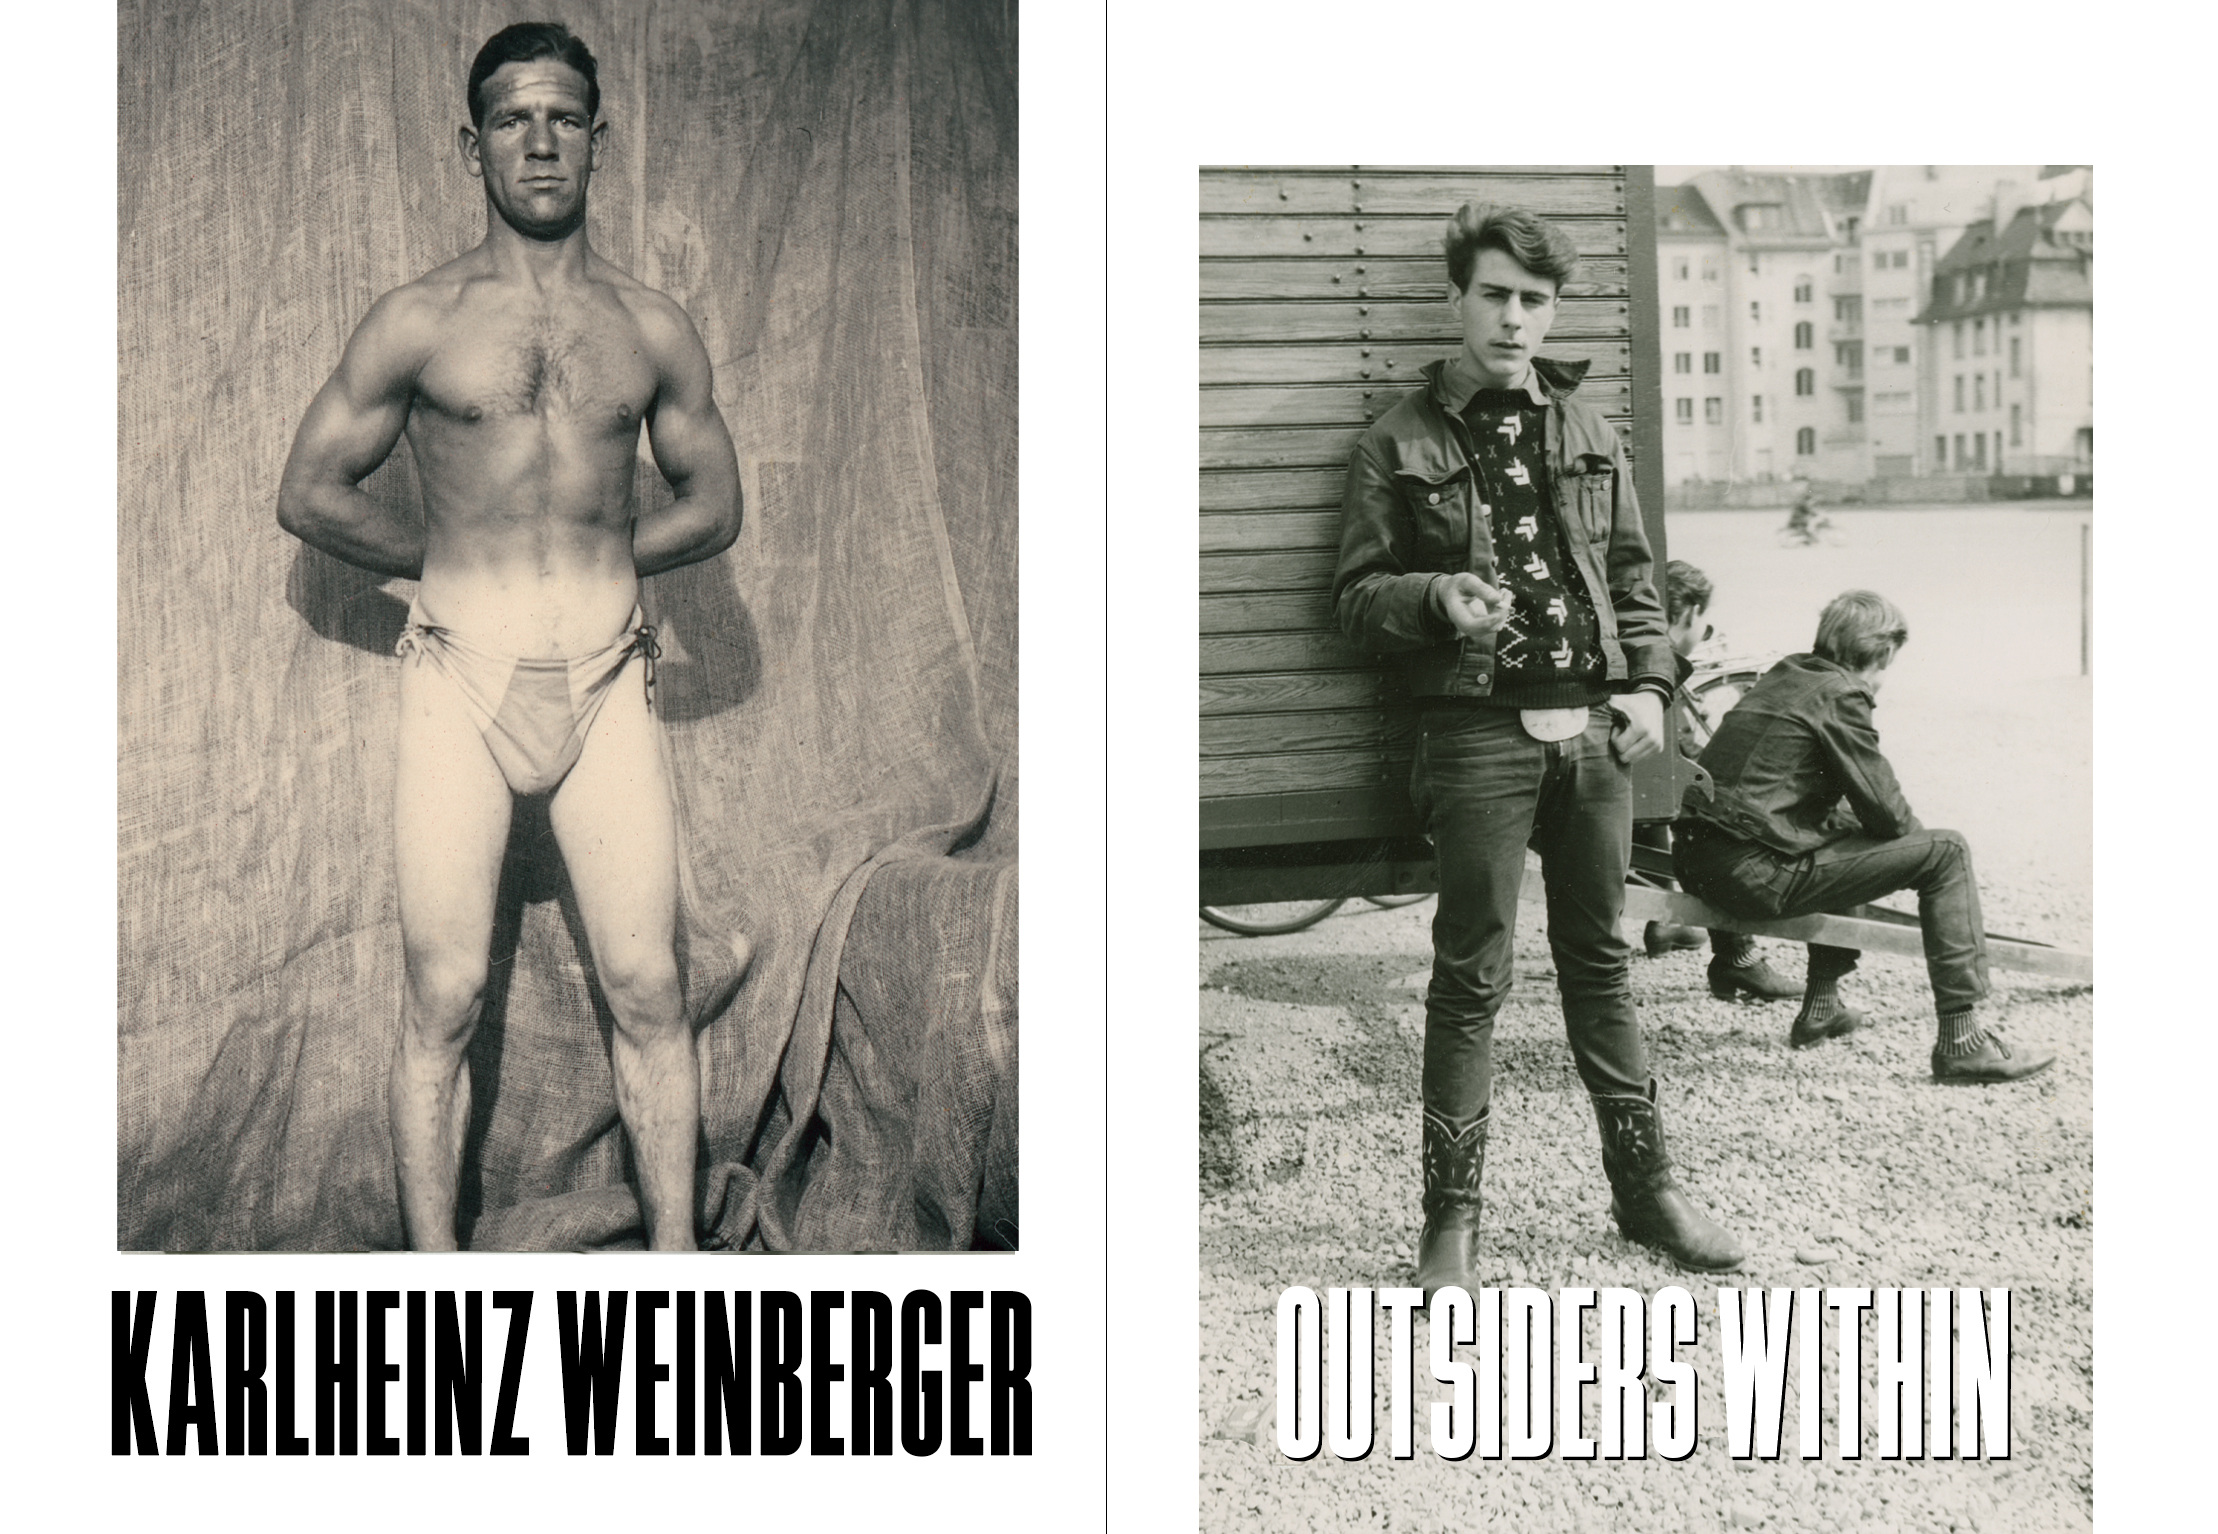 Exploring Masculinity Through Weinberger's Lens